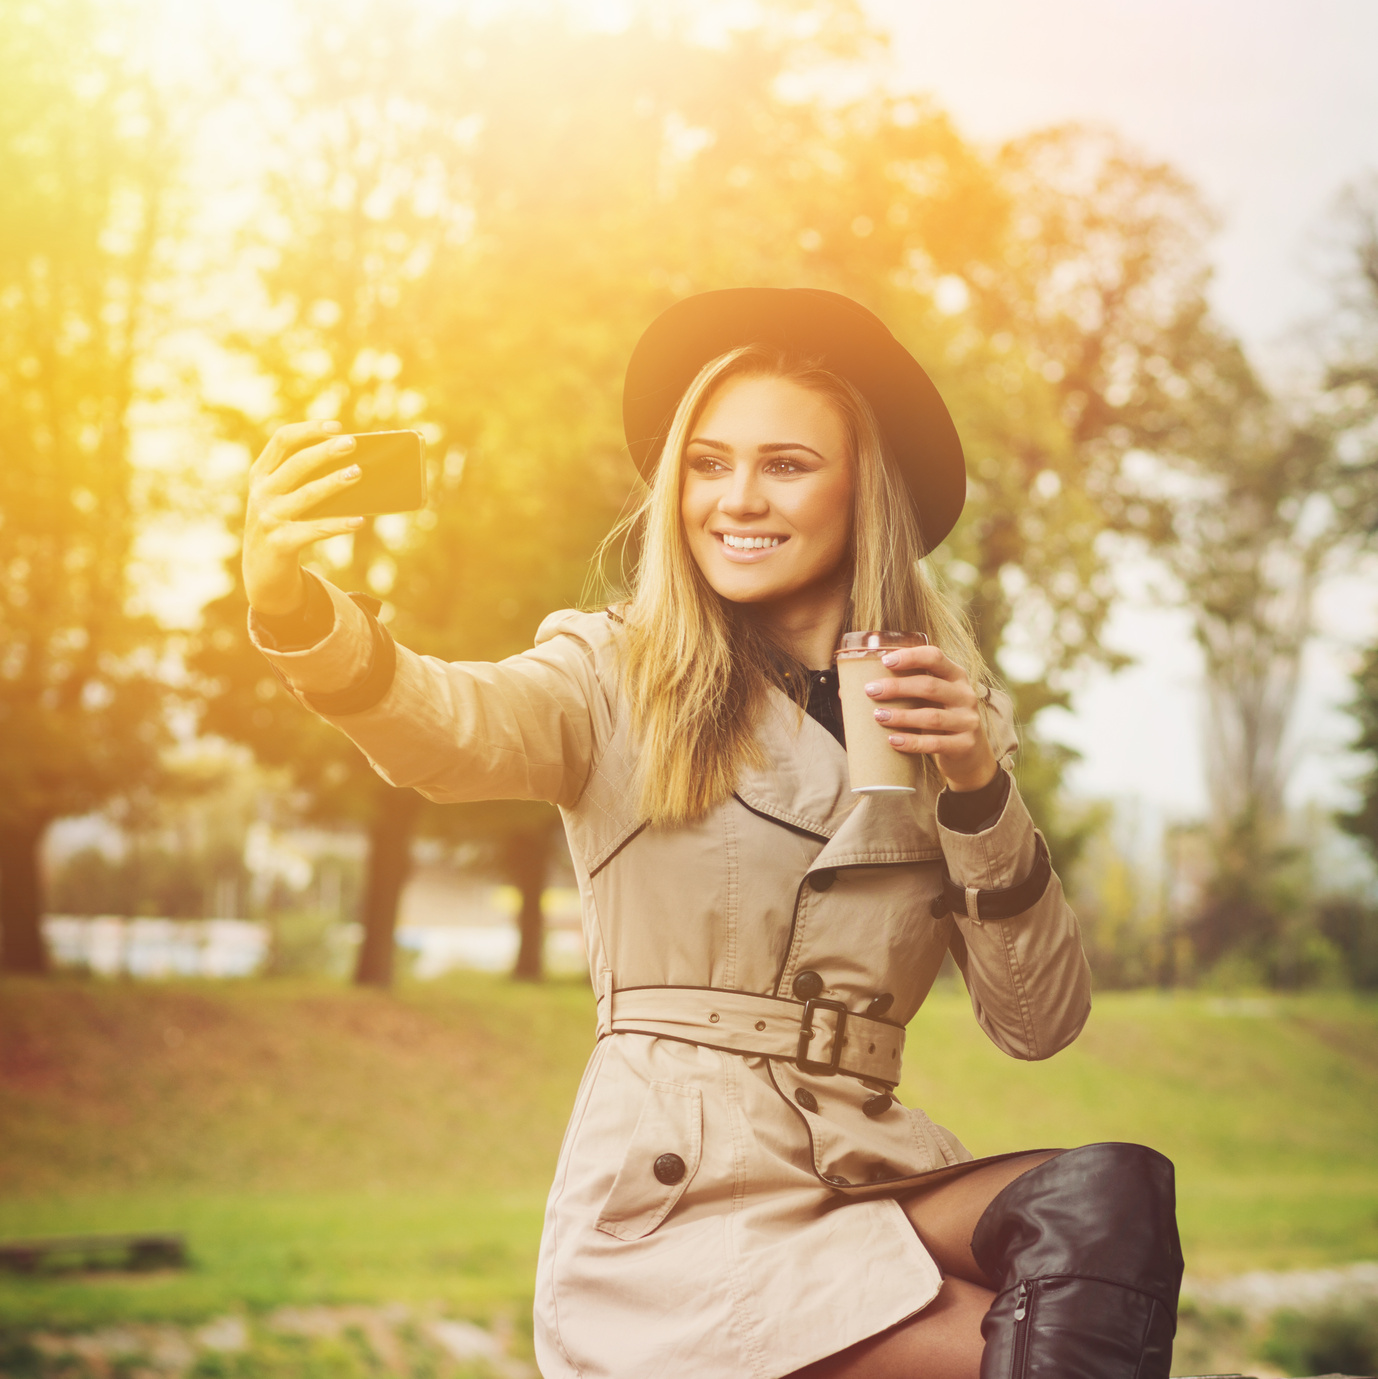 Gorgeous stylish young woman taking a selfie outdoors in autumn